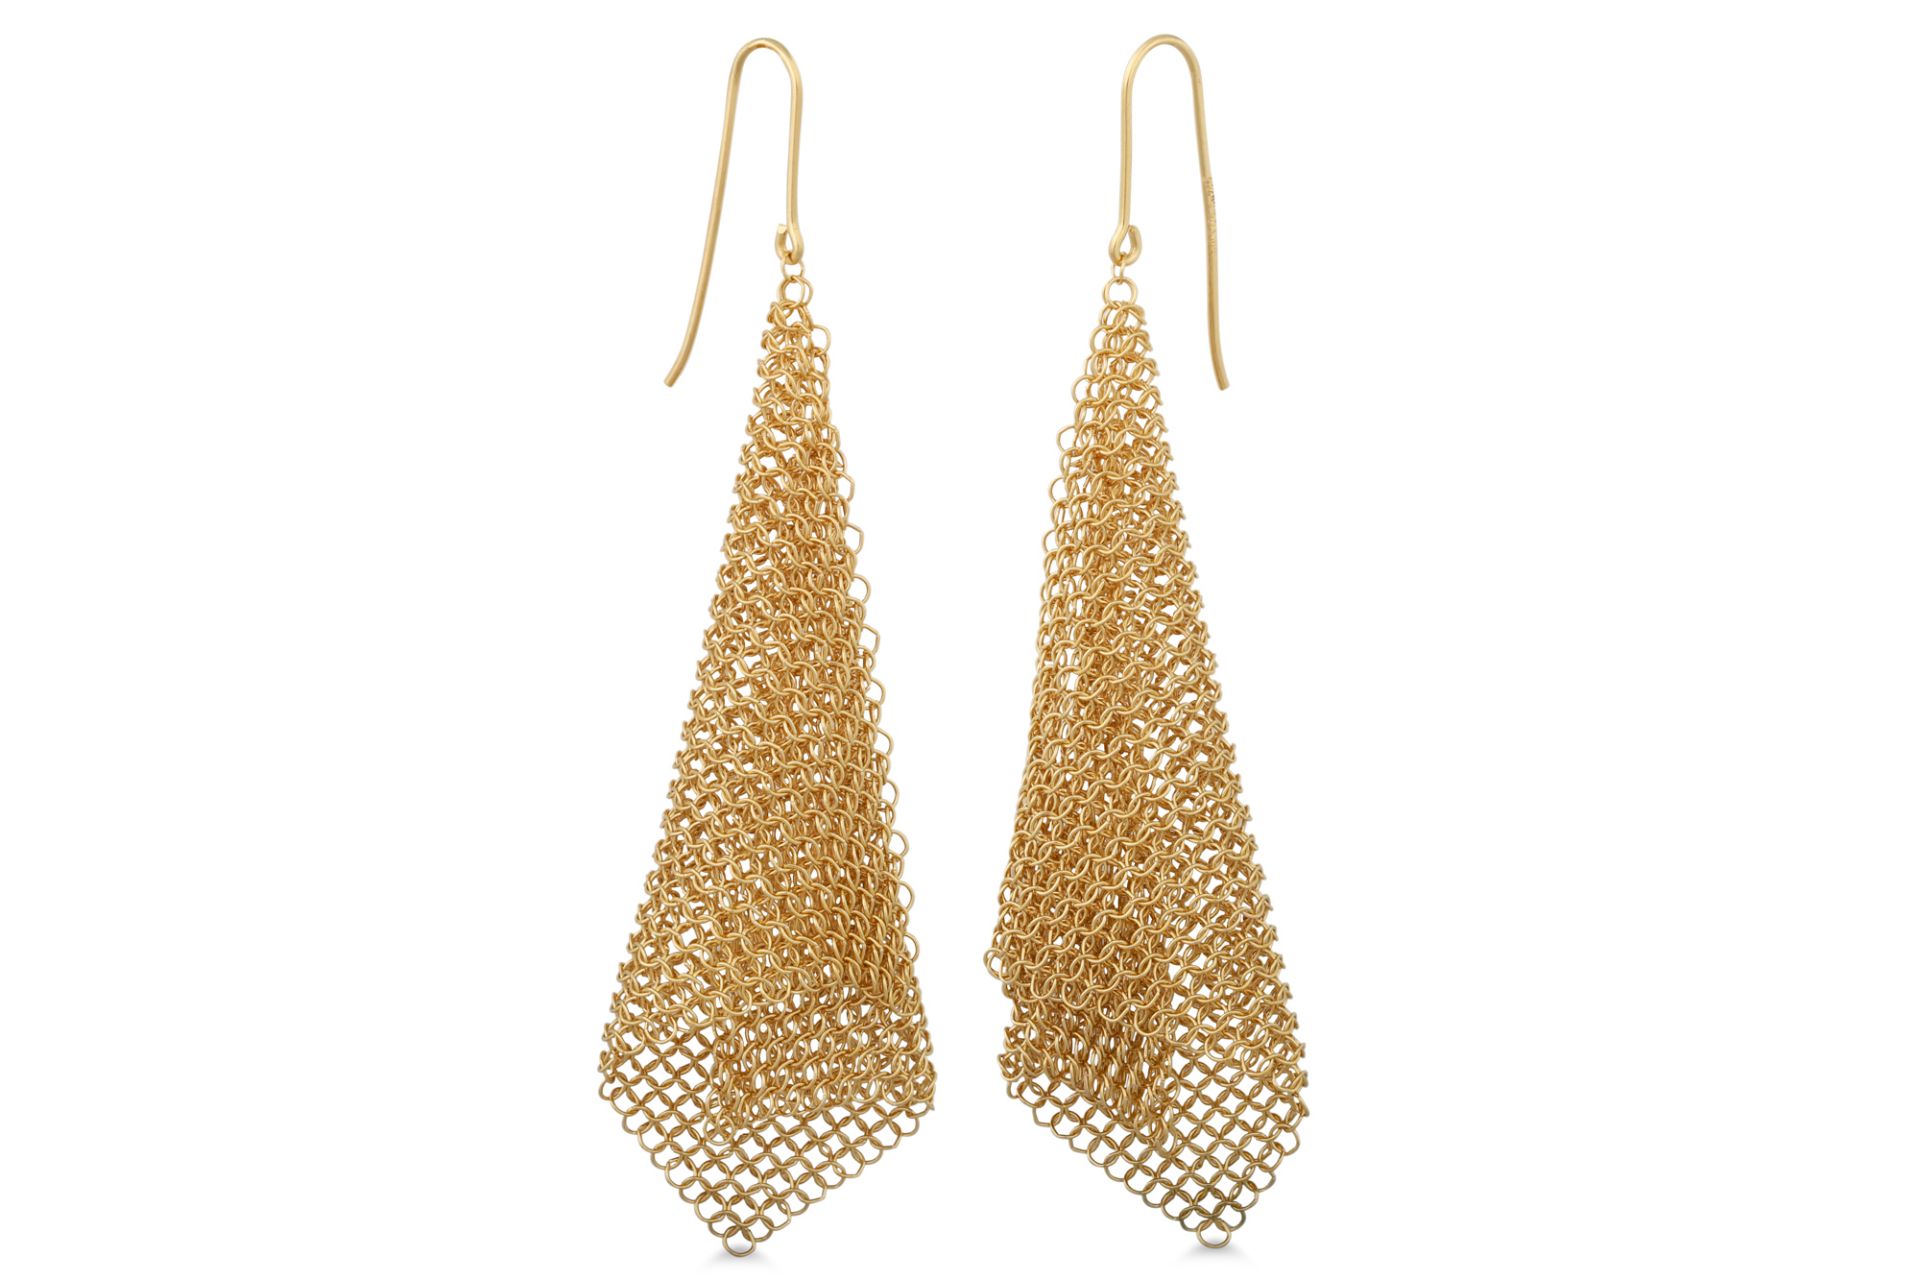 A PAIR OF 18CT GOLD TIFFANY & CO. EARRINGS, mesh design by Elsa Peretti, ca 1980